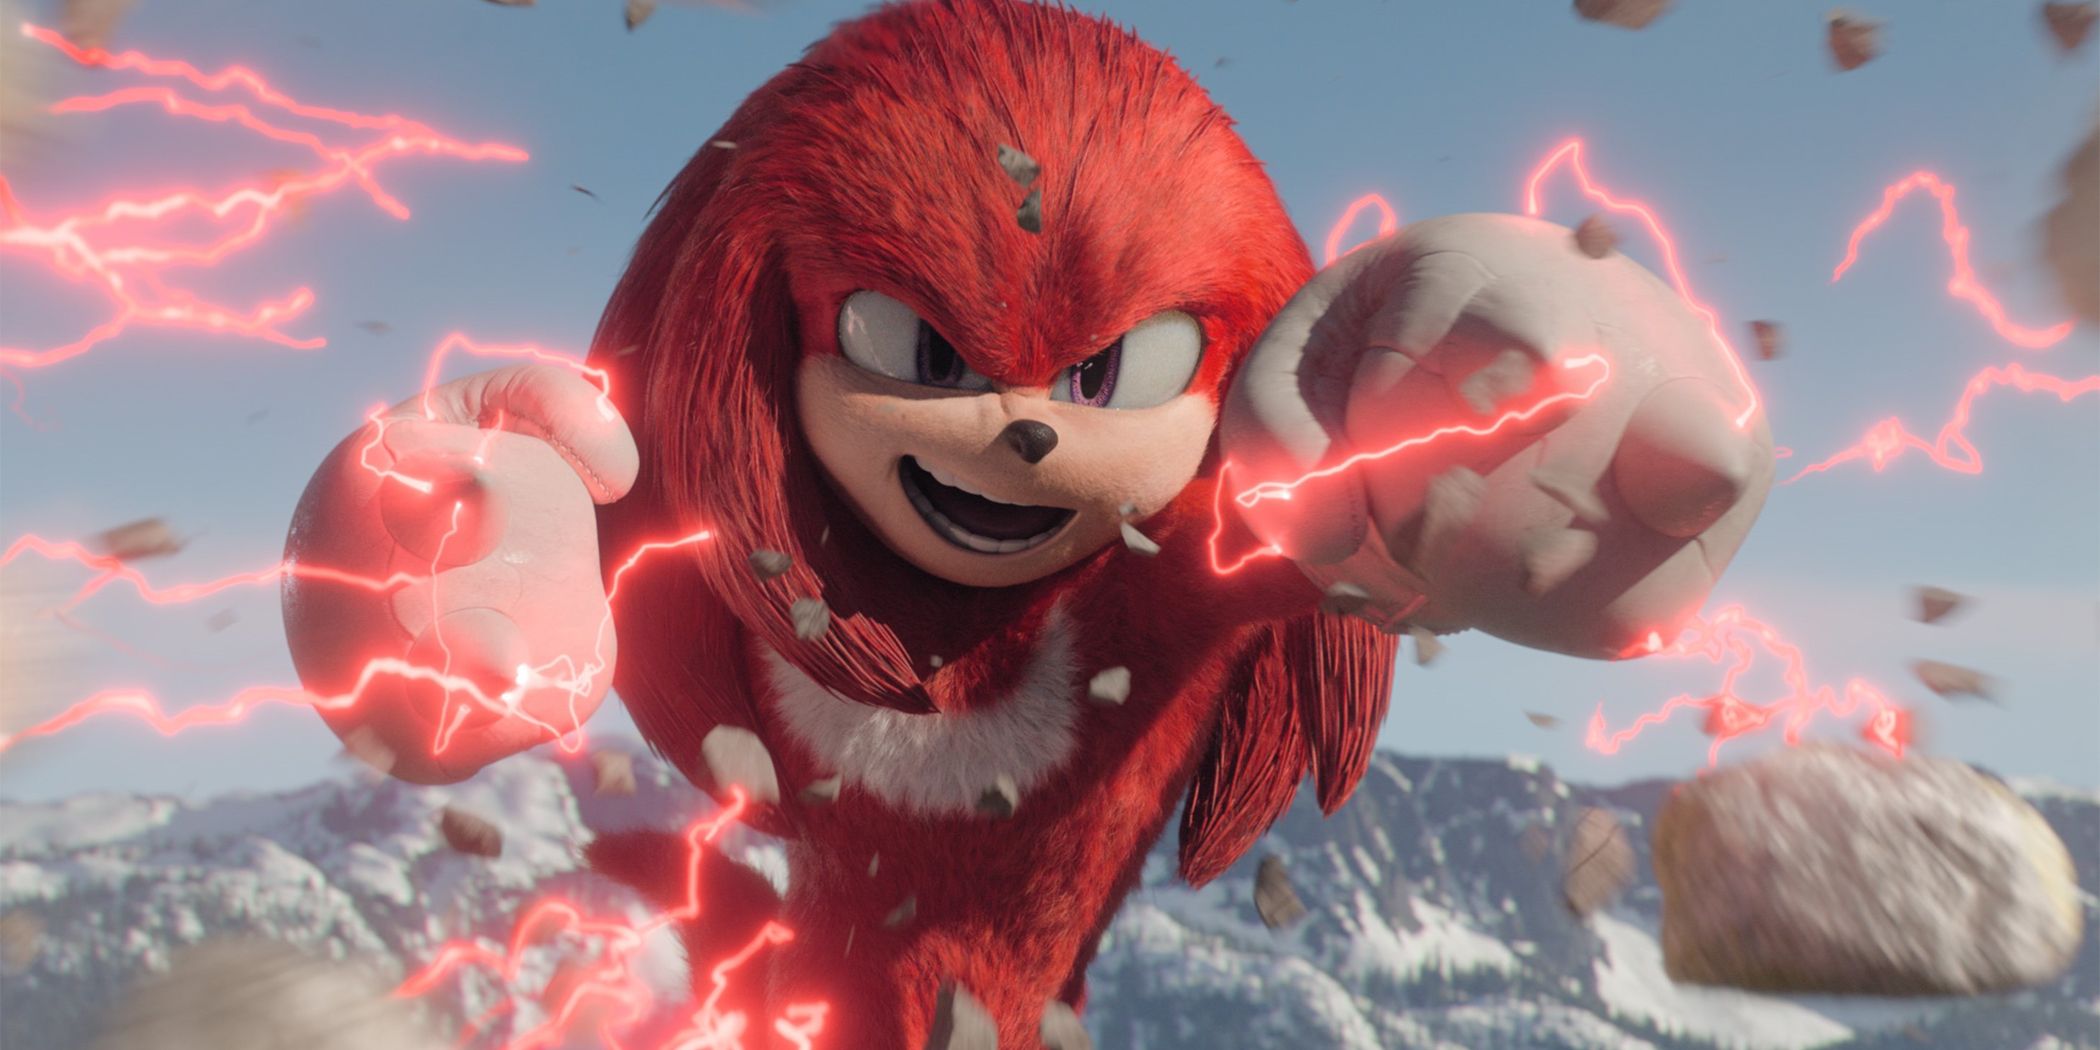 Knuckles surrounded by his red chaos energy, blasting through rocks with mountains in the background.